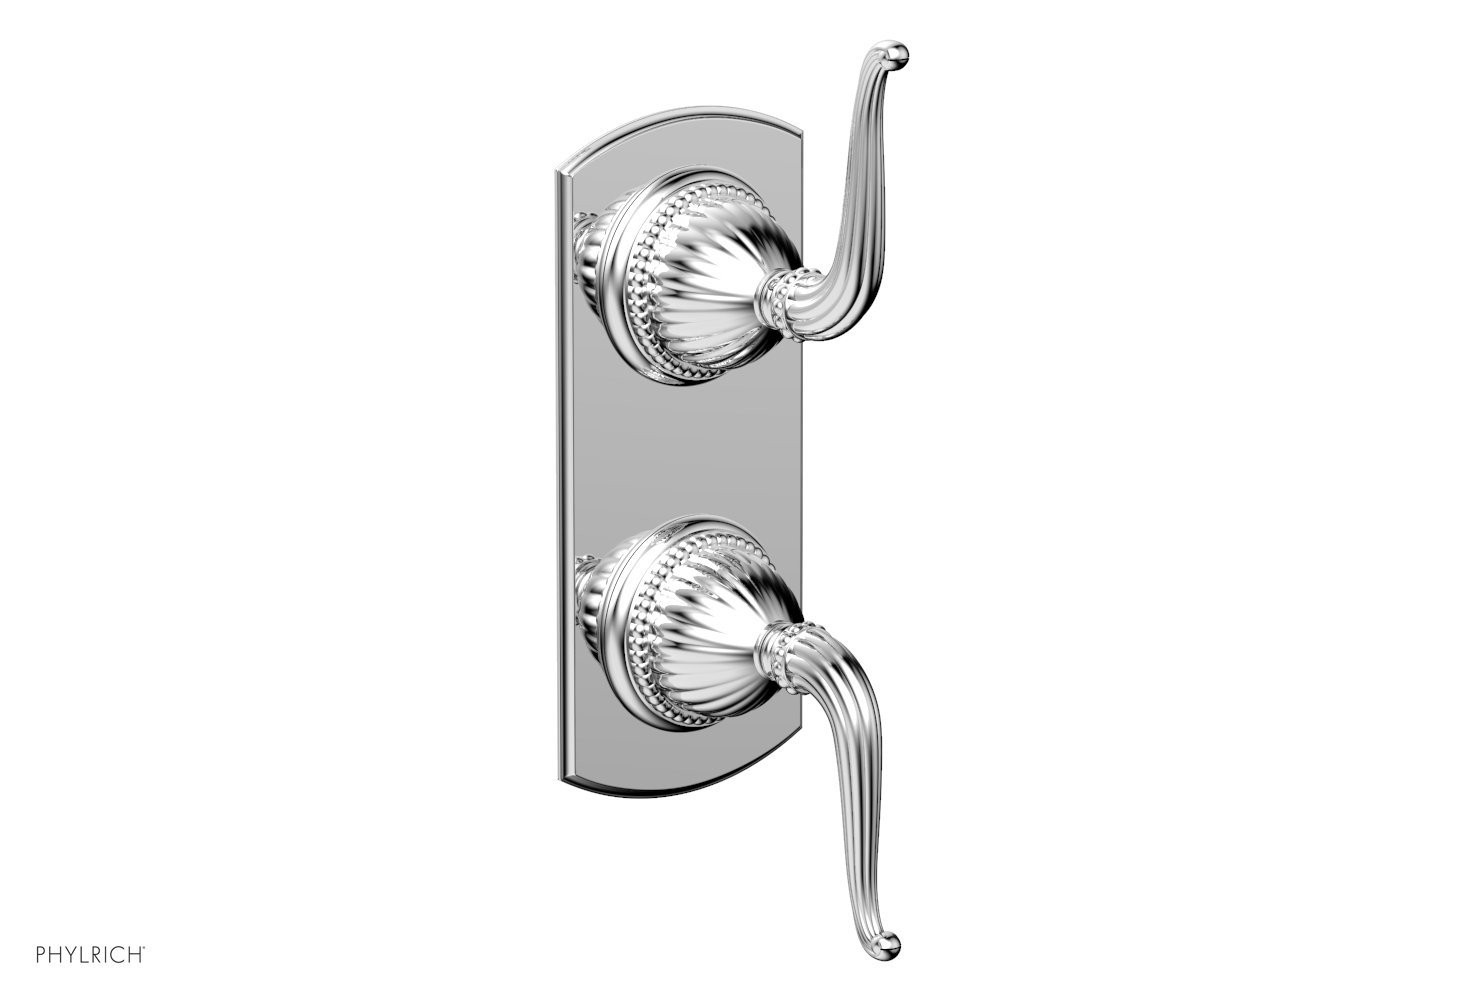 PHYLRICH 4-376 GEORGIAN & BARCELONA WALL MOUNT TWO LEVER HANDLES MINI THERMOSTATIC VALVE WITH VOLUME CONTROL OR DIVERTER TRIM